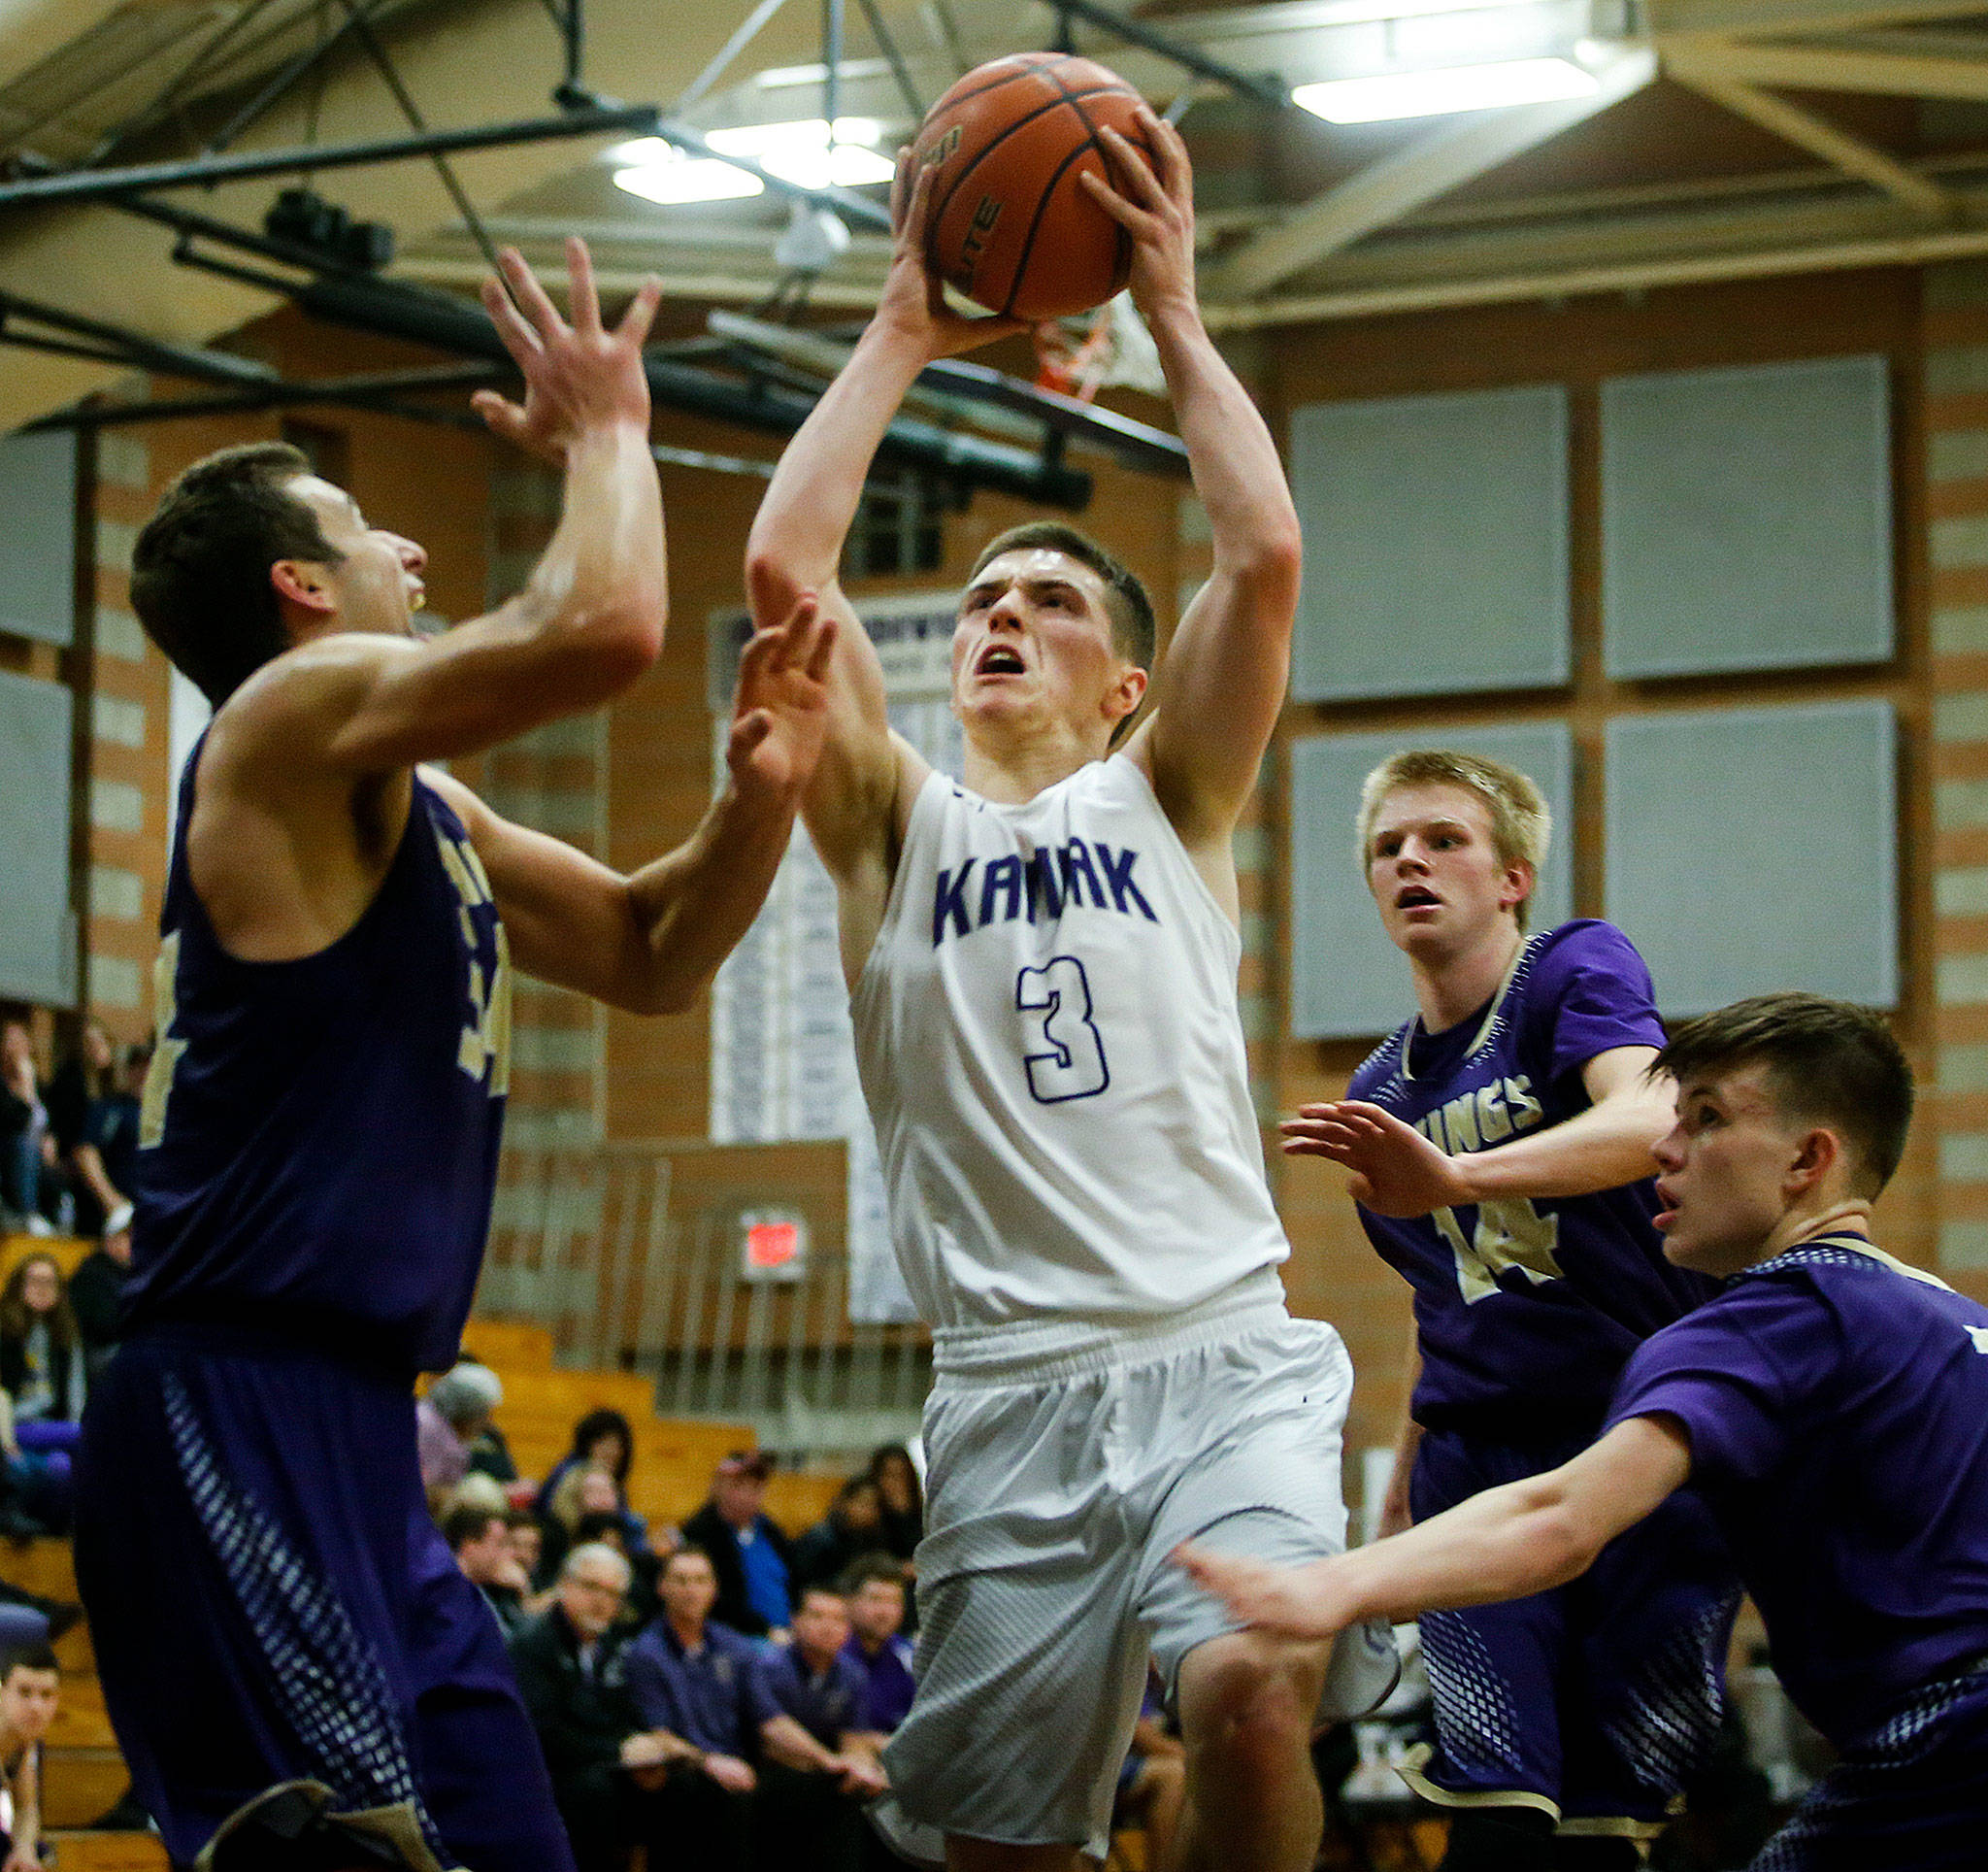 Kamiak High School basketball standout Carson Tuttle signed Wednesday to play at Texas A&M-Commerce. (Ian Terry / The Herald)